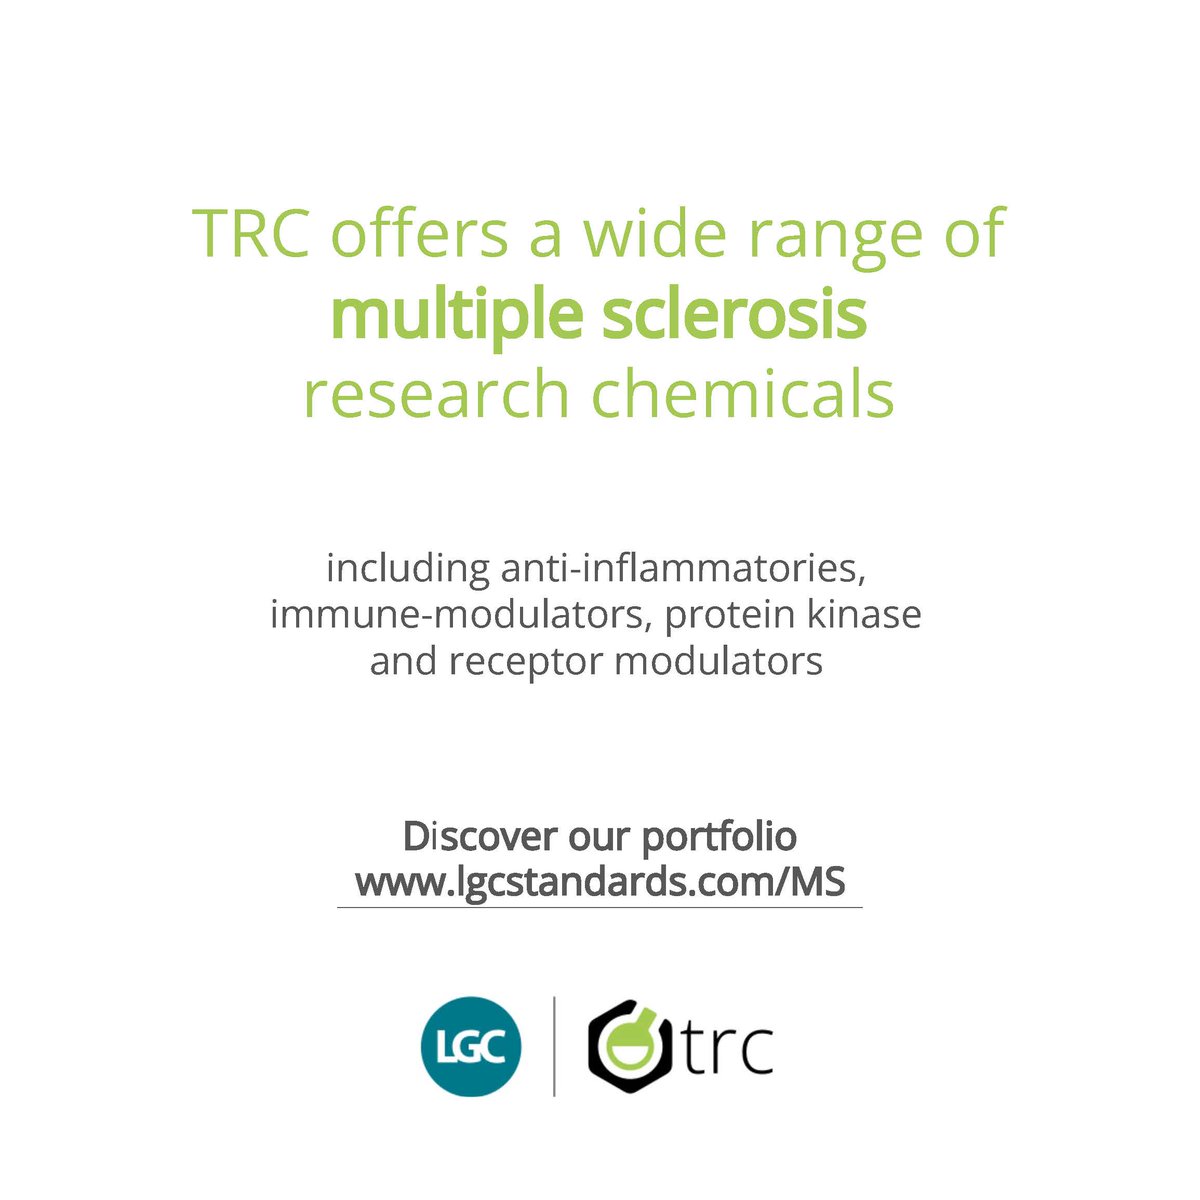 Our TRC range includes numerous modulators of #MultipleSclerosis-relevant targets such as BTK, chemokine receptors, interferons and immune cell migration inhibitors. Discover our portfolio at okt.to/NjJbYi

#ResearchChemicals